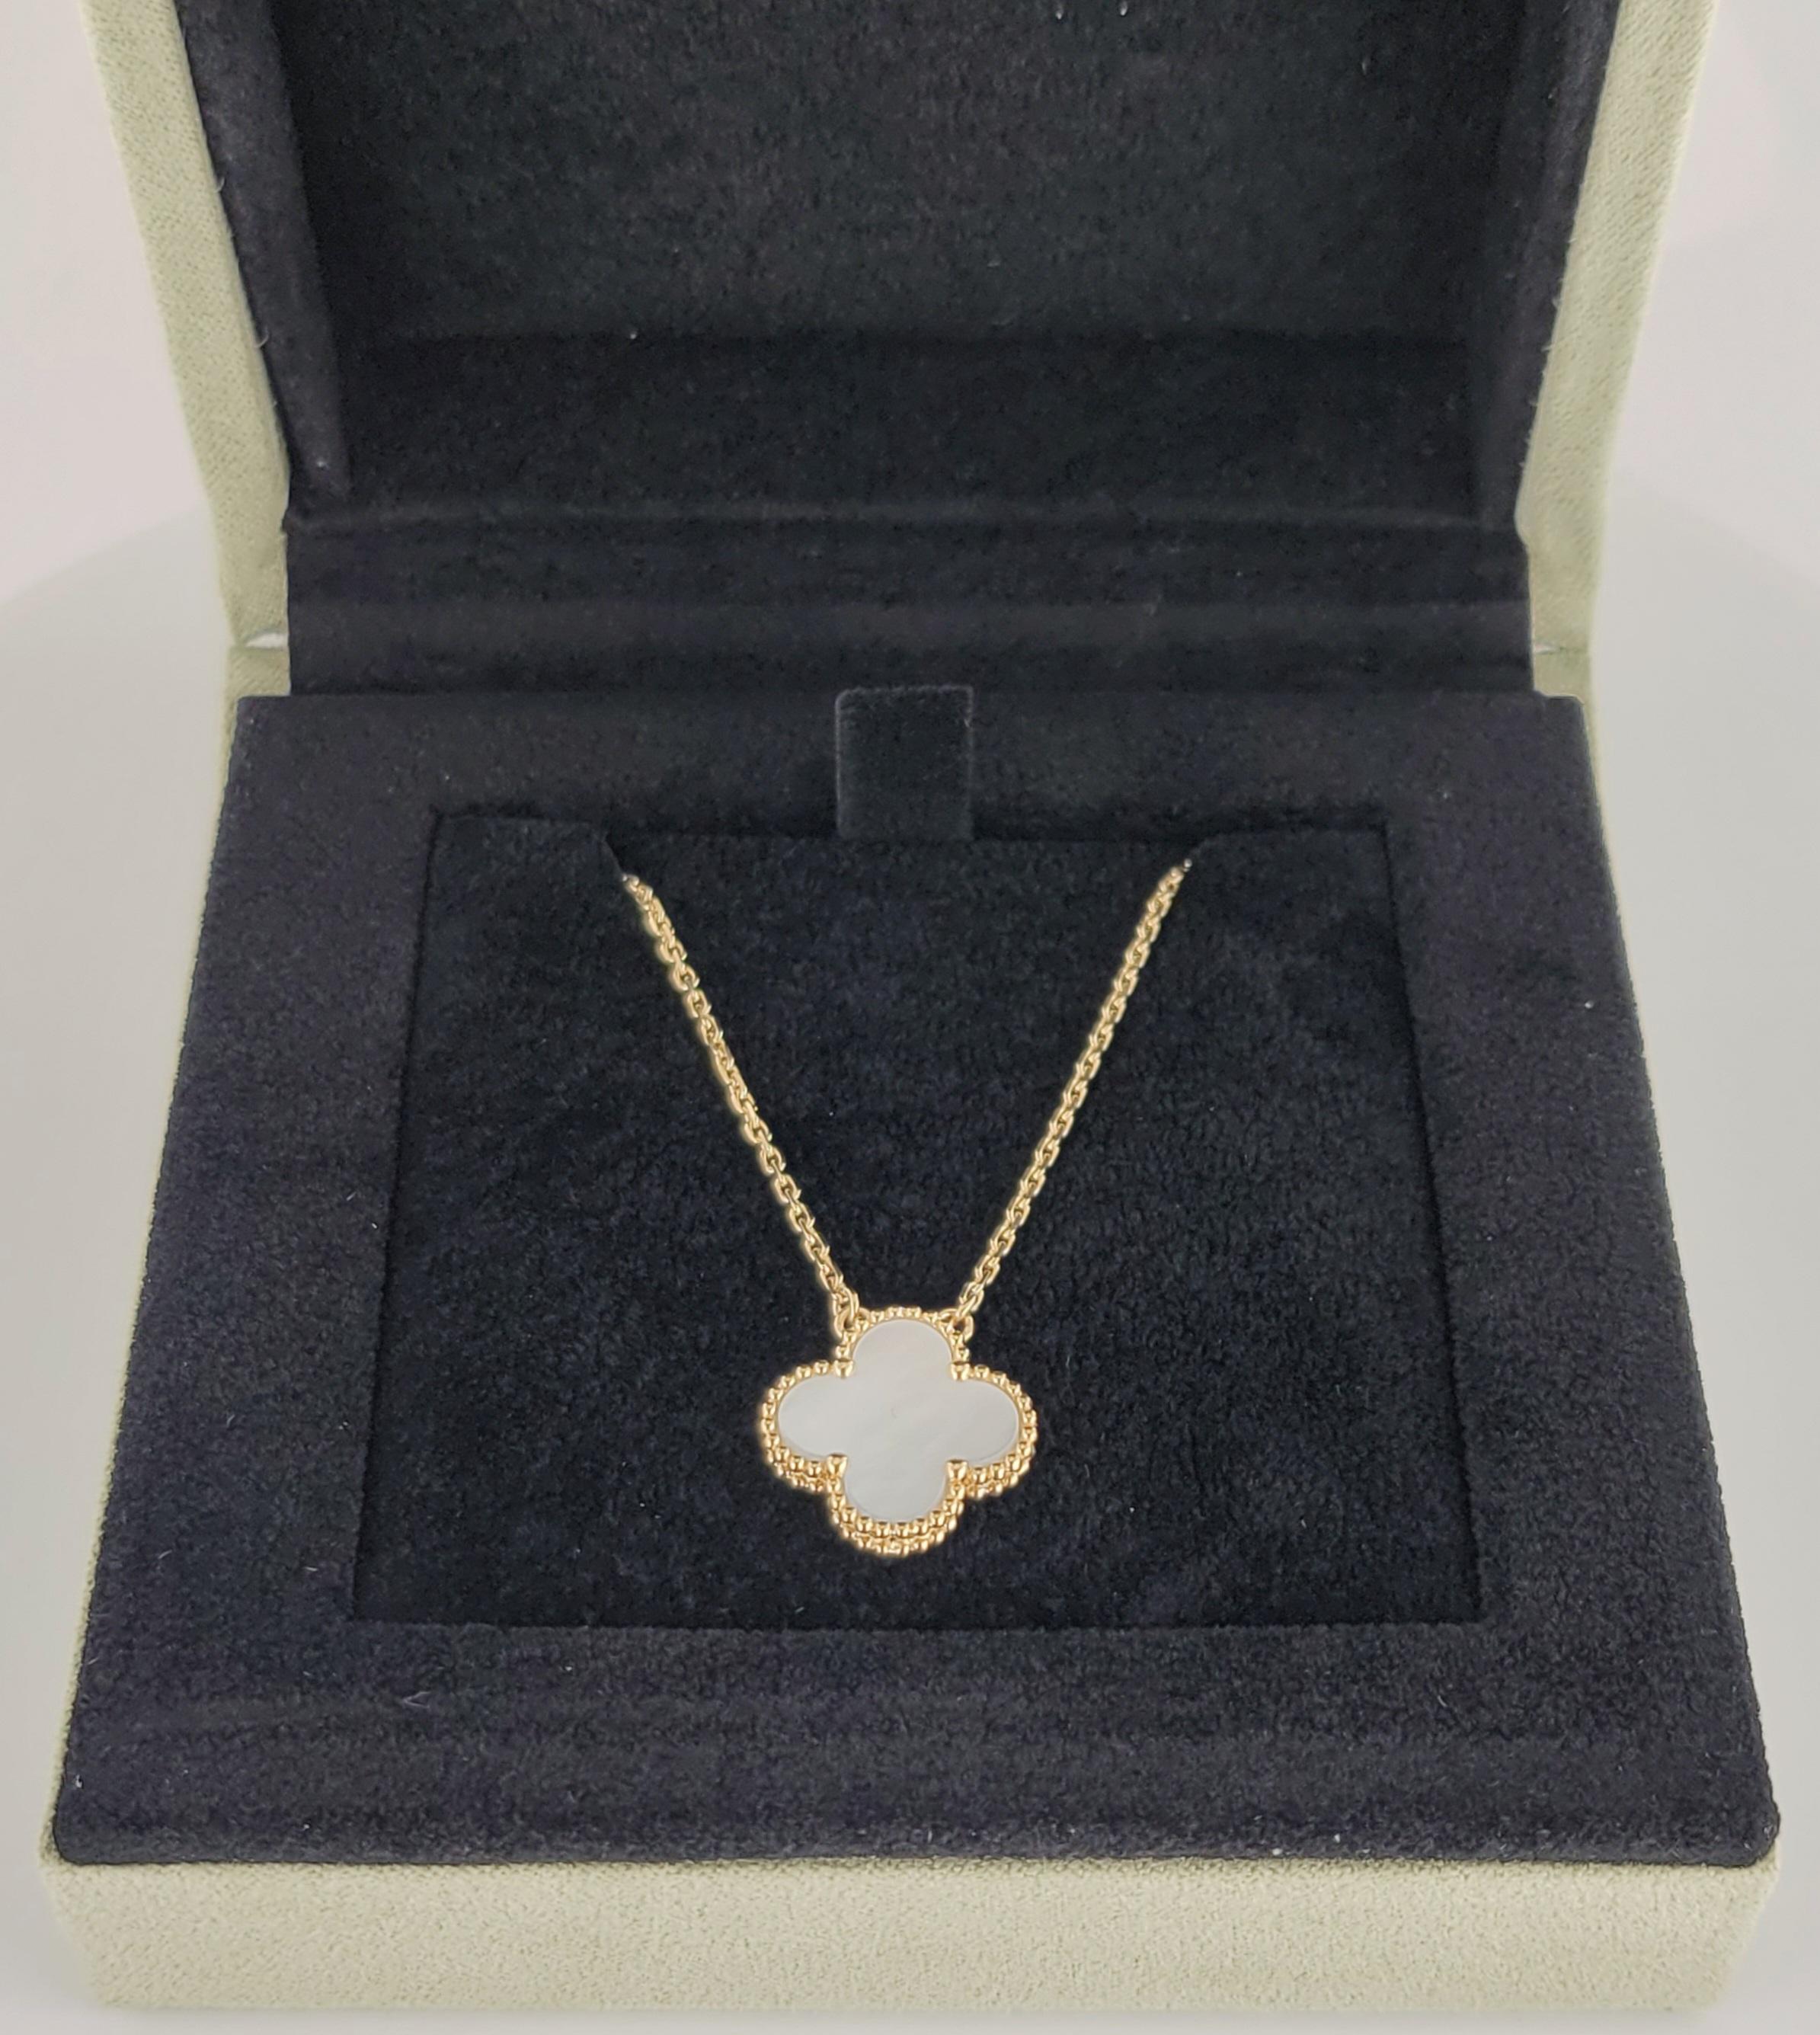 Brand Van Cleef Arpels 
Mint Condition 
18K Yellow Gold Mother of pearl 
Gender women
Chain length 18'' Long 
Adjustable 18'' 16''
Motif dimension 15mm
Motif  width 2.5mm
Comes with Van Cleef Pendant box